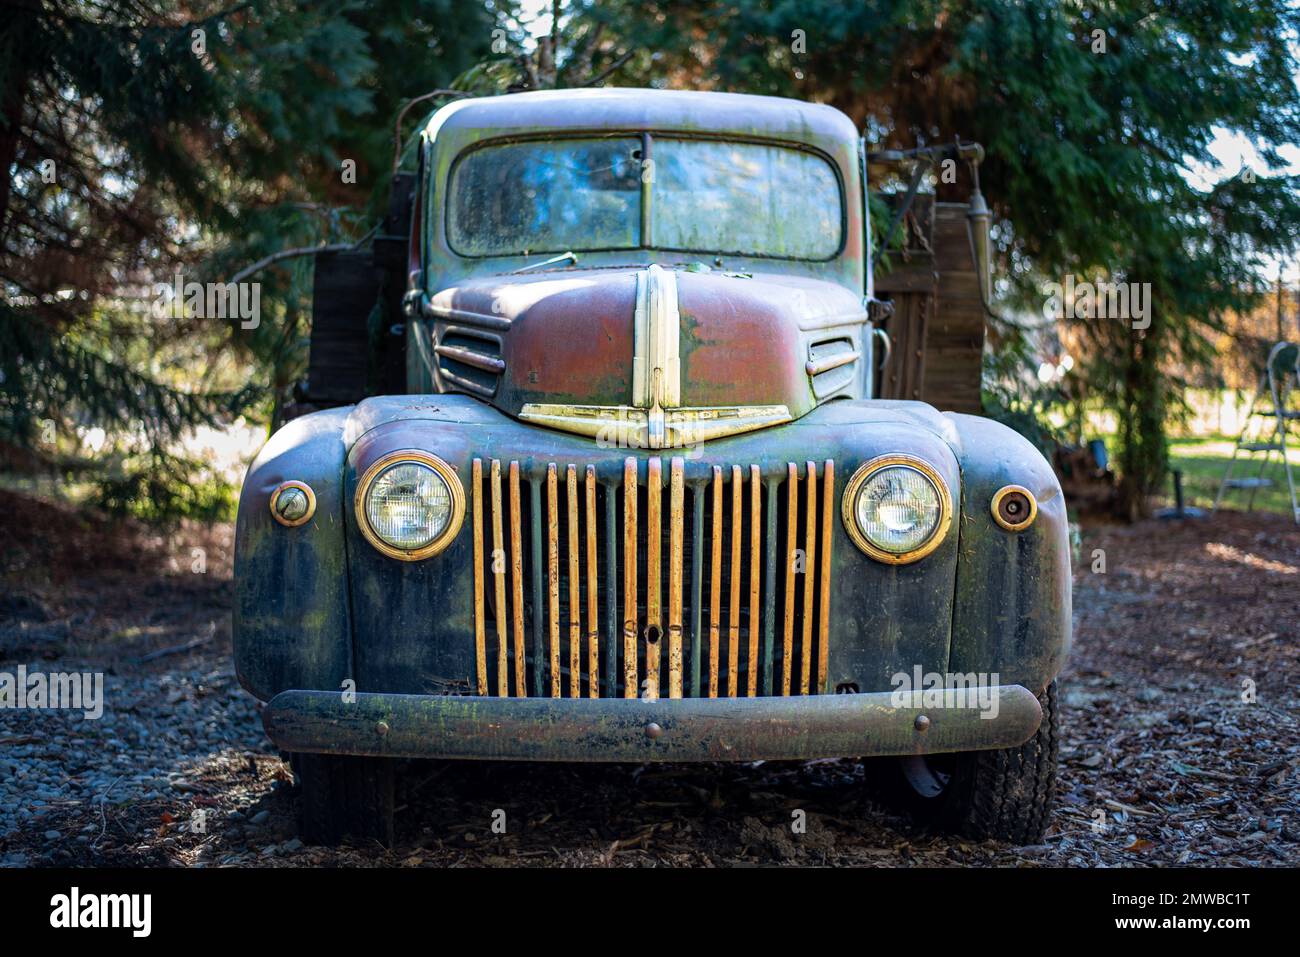 The front of an old vintage Ford truck in the countryside with pine trees in the background Stock Photo